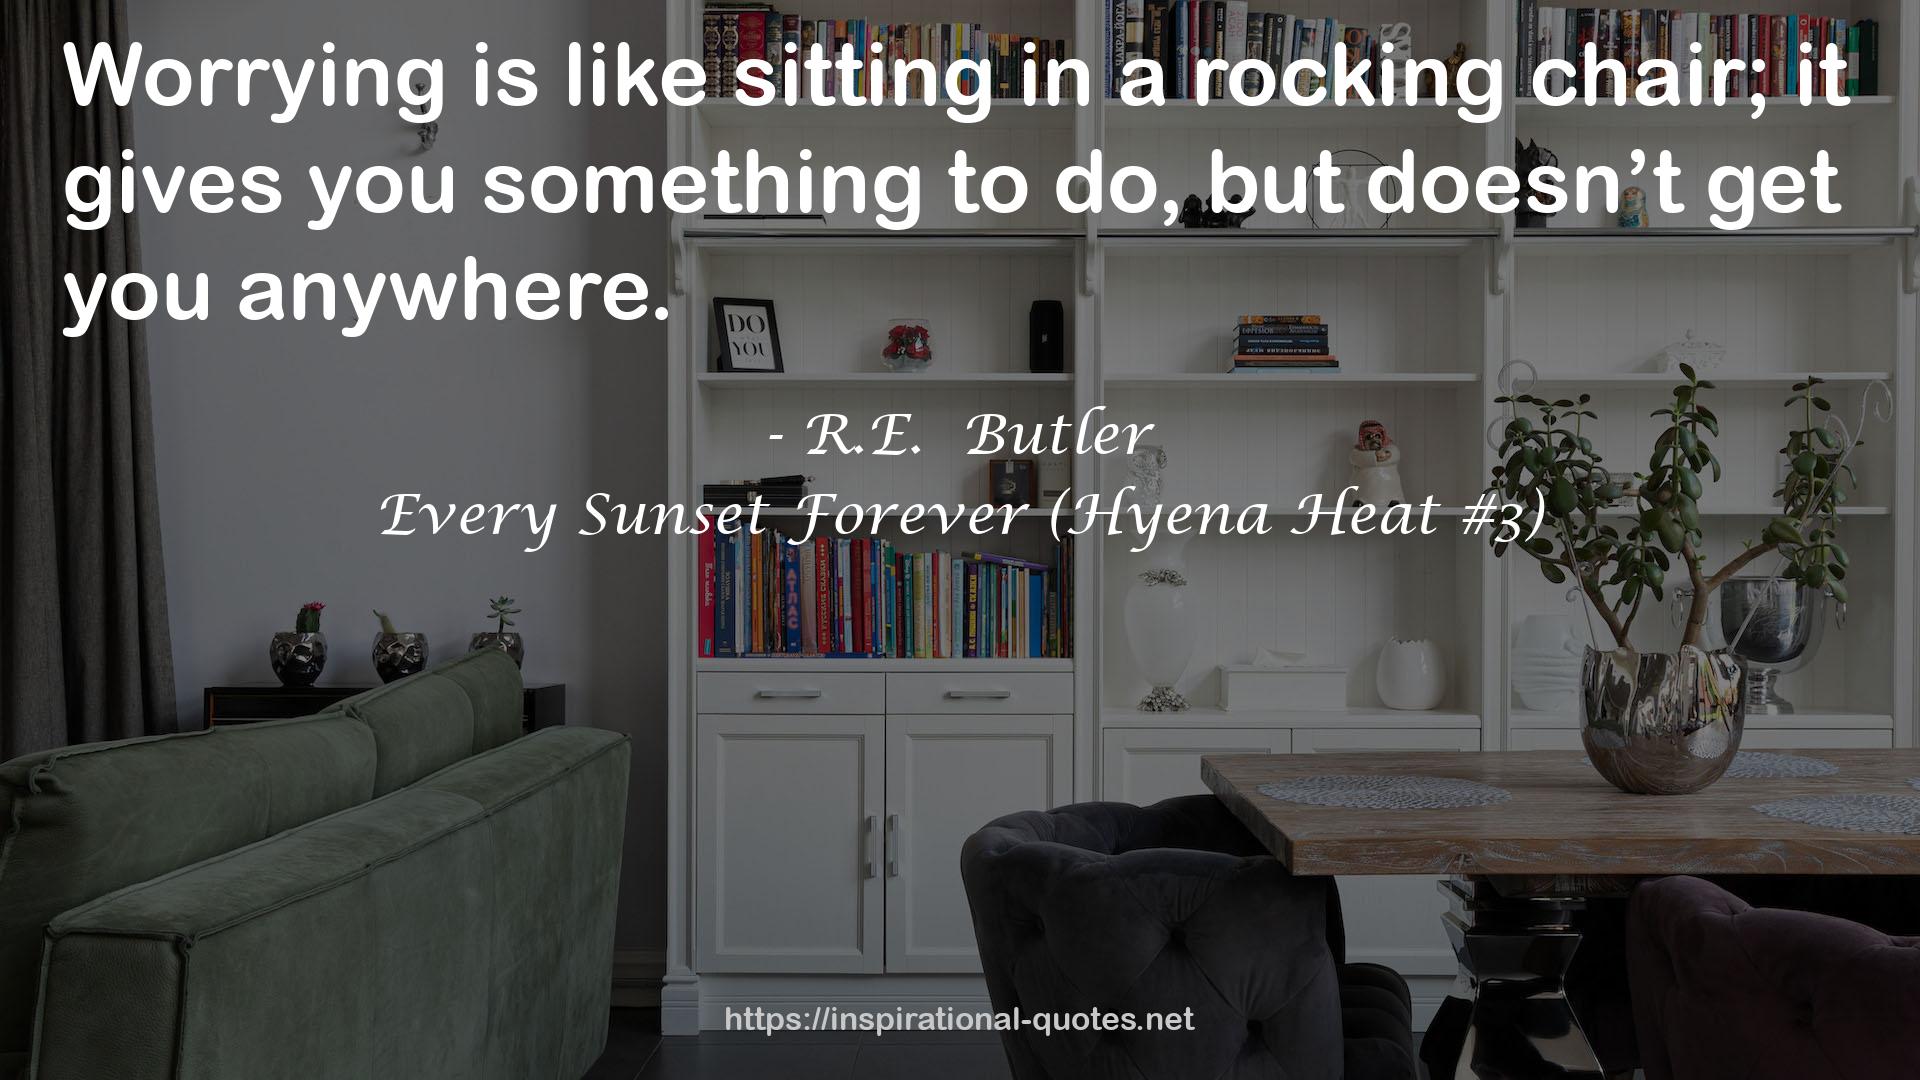 Every Sunset Forever (Hyena Heat #3) QUOTES